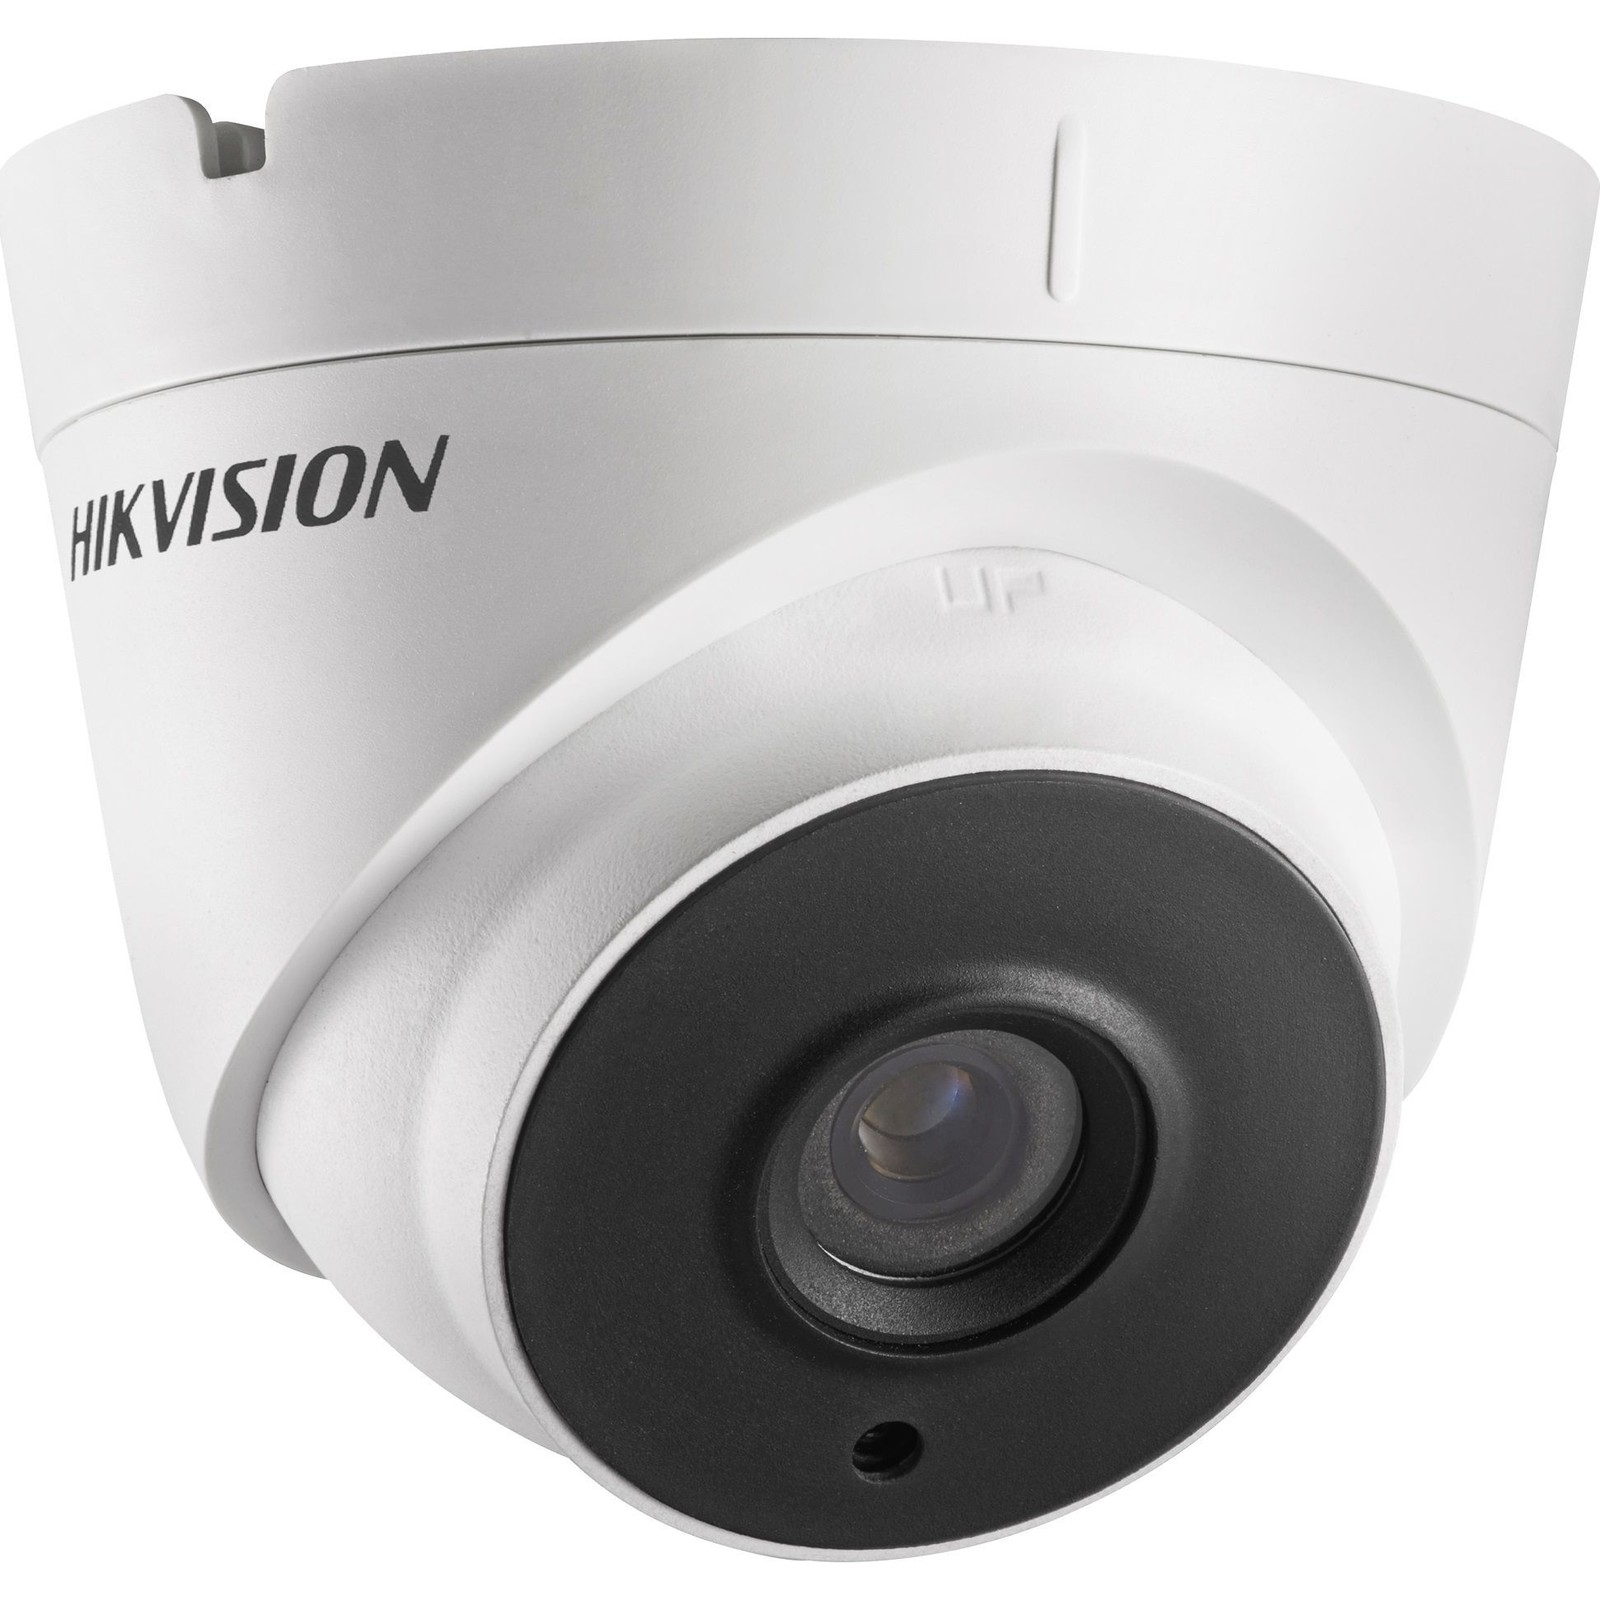 You Recently Viewed Hikvision DS-2CE56D8T-IT3E 2MP External Turret Camera Image